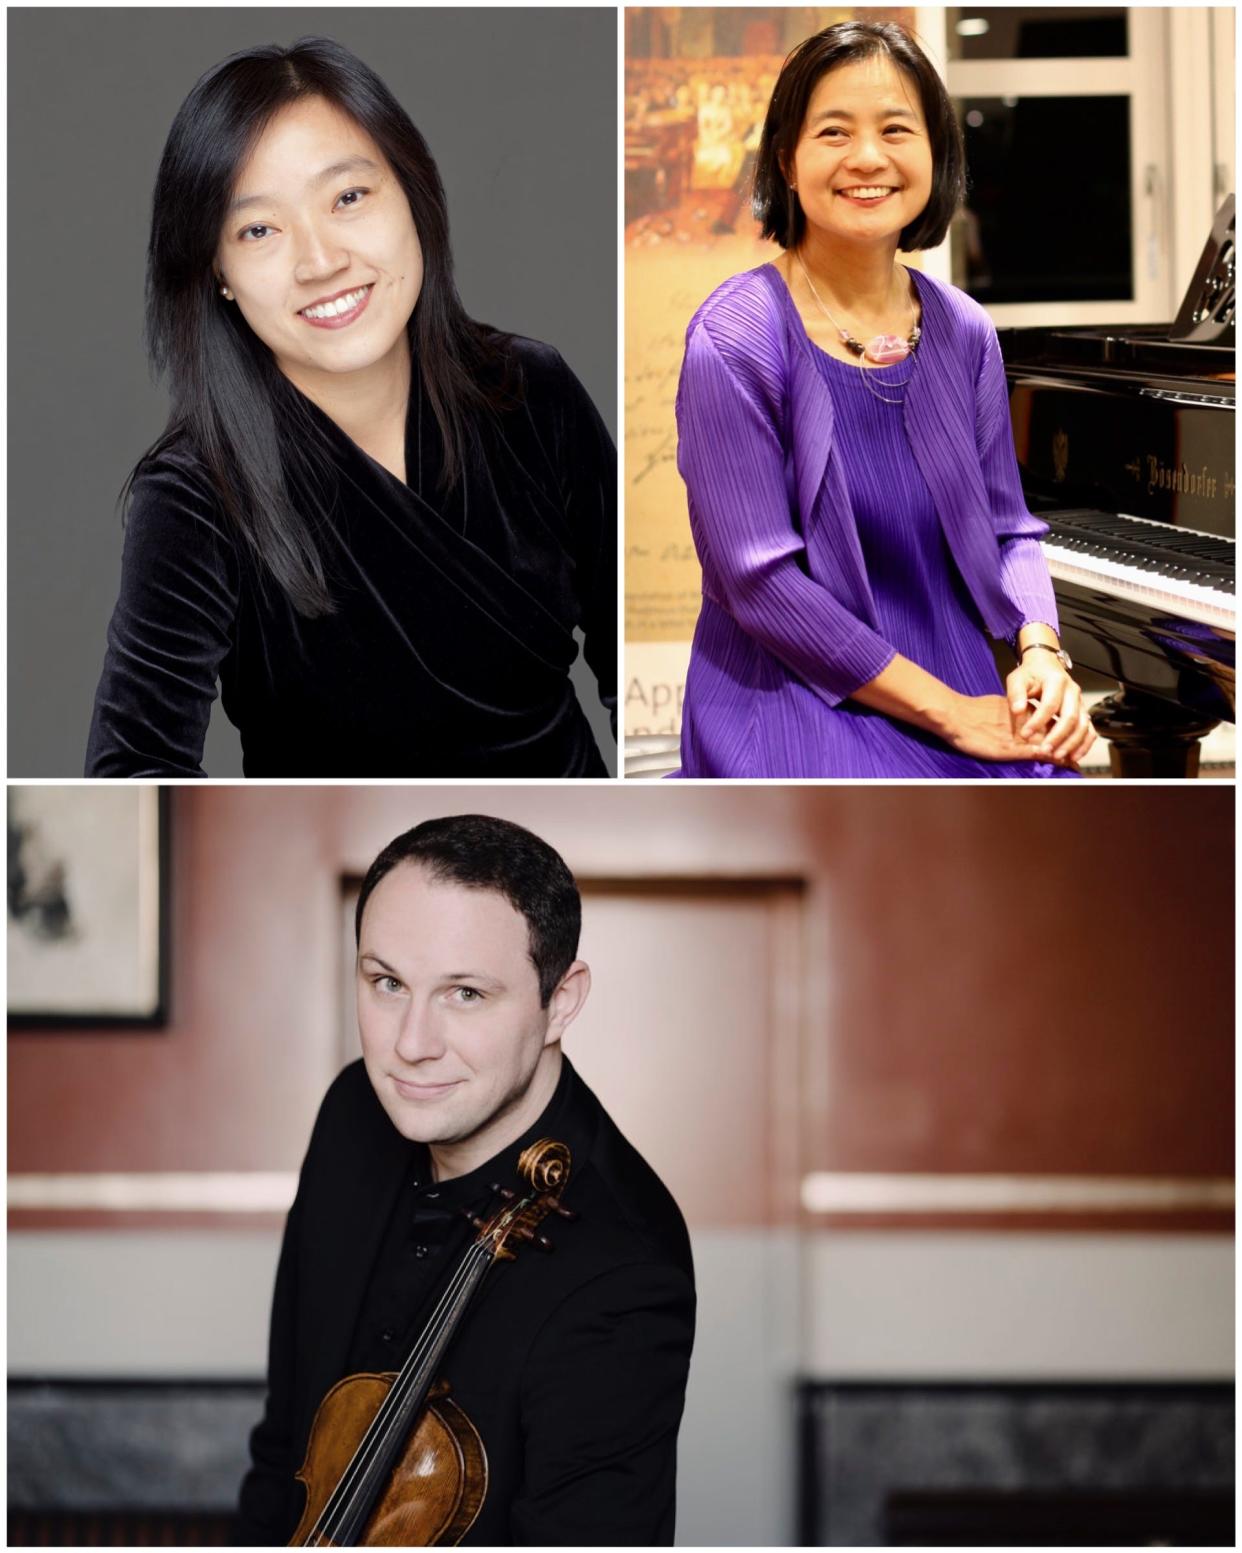 Sunday at Central will present “Paris, La Belle Époque” featuring local musicians, clockwise from left, cellist Pei-An Chao, pianist Mariko Kaneda and violinist Jeffrey Myers, on Sunday at Broad Street Presbyterian Church.